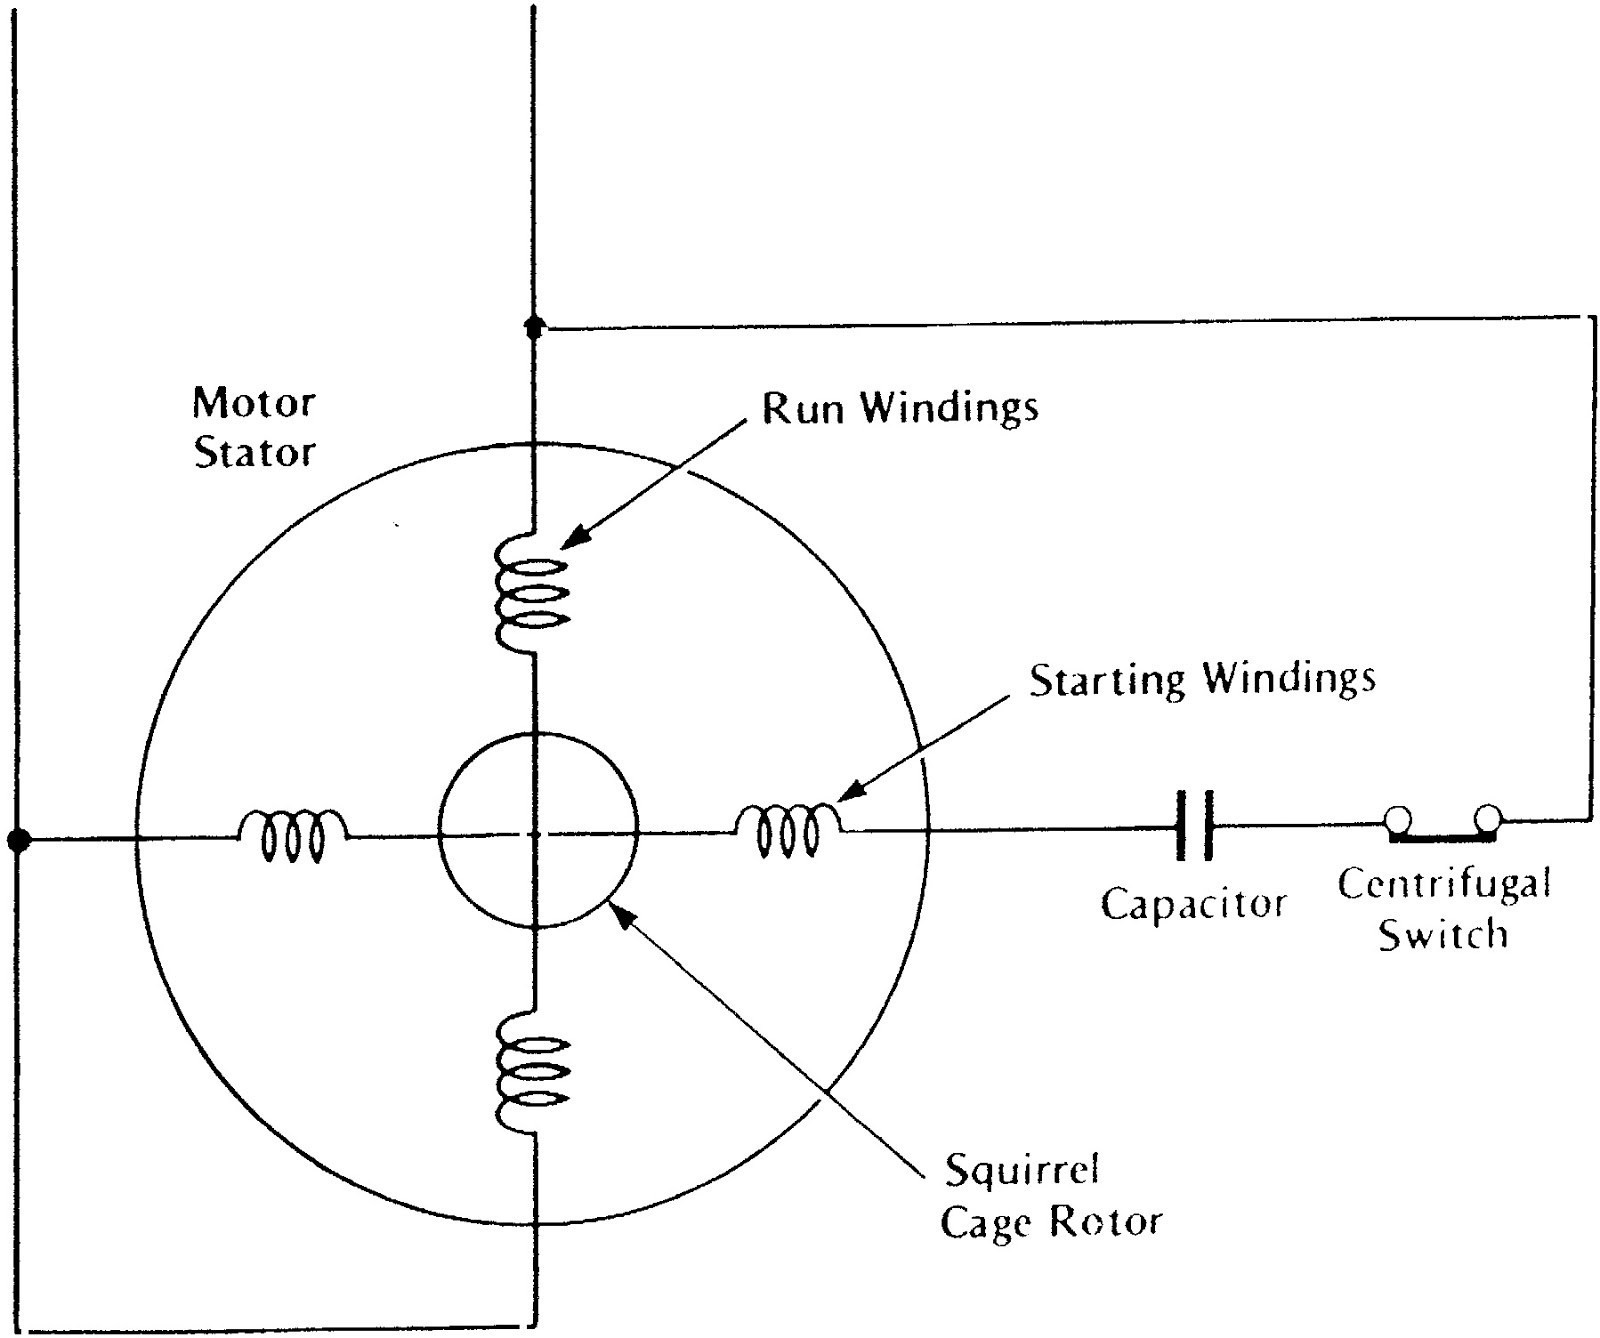 Wiring Diagram for Single Phase Motor Types Single Phase Induction Motors Best Motor Wiring Diagram Of Wiring Diagram for Single Phase Motor